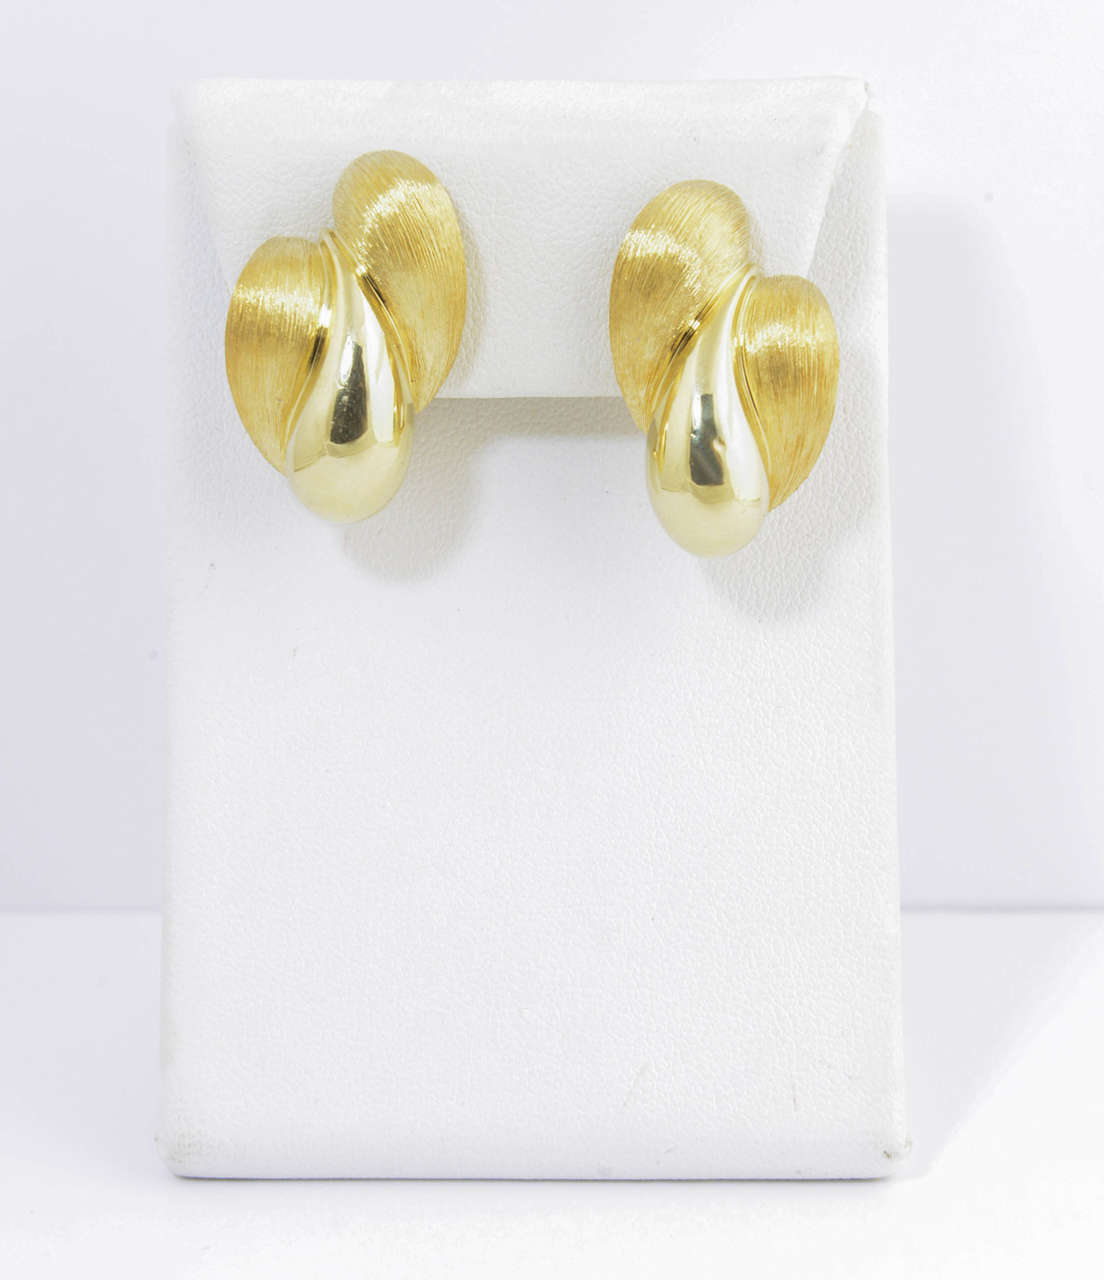 Designed by Henry Dunay, these earrings feature a high polish and Florentine finish yellow gold curl seductively up the ear.  These earrings have omega backs (no posts).